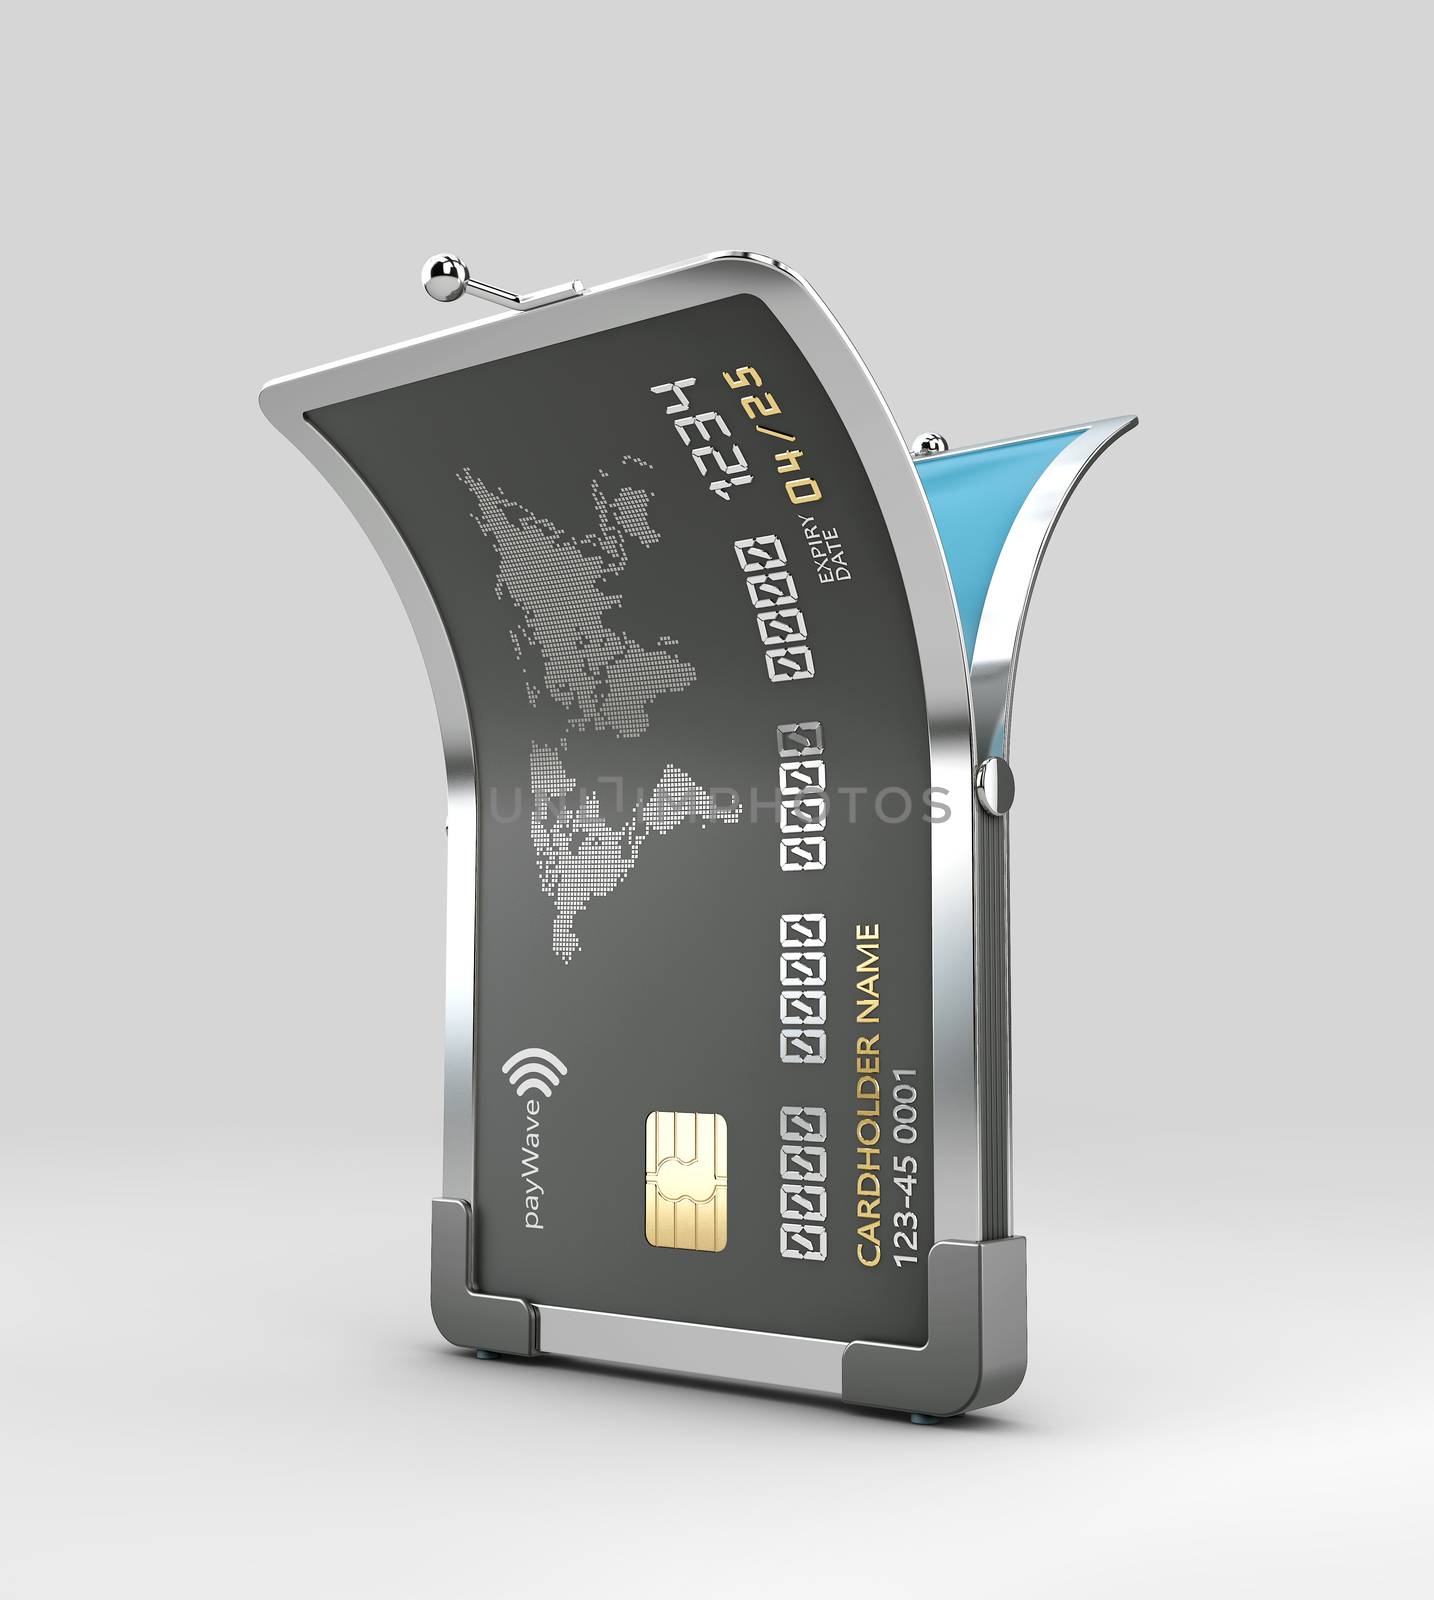 Open Credit card, clipping path included, 3d Rendering.